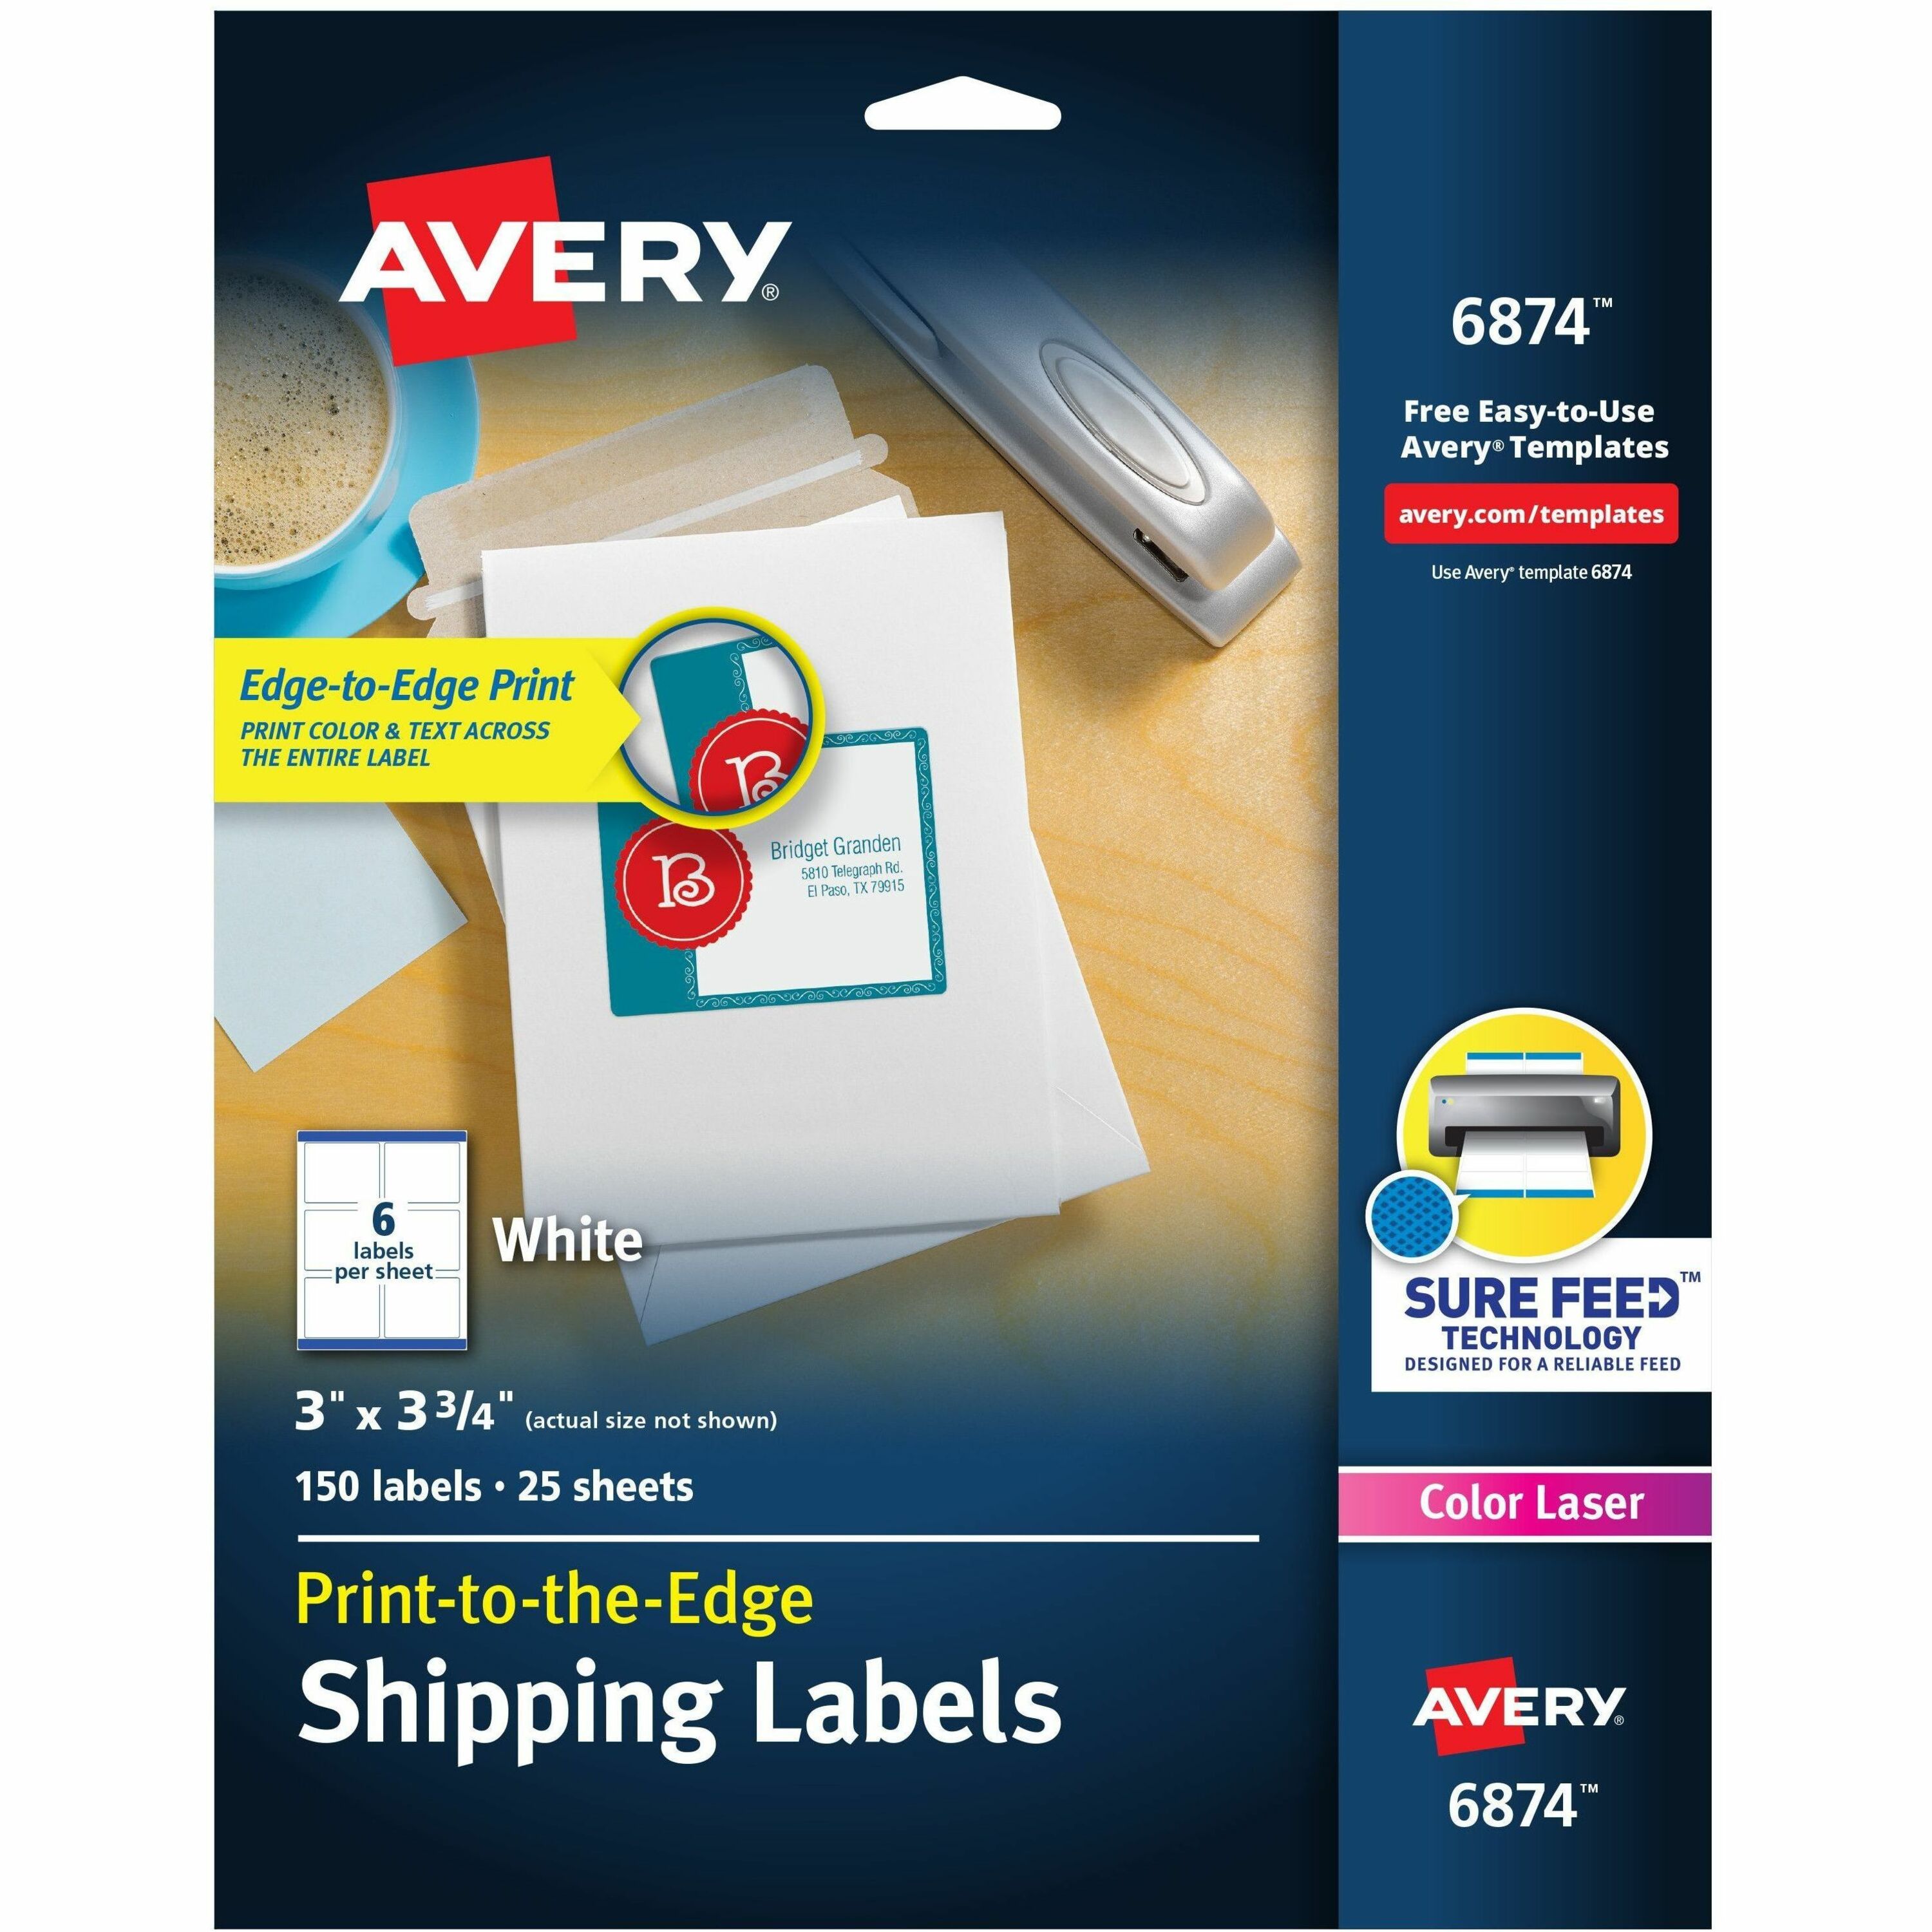 Avery Printable Postcards With Sure Feed Technology 4 x 6 White 100 Blank  Postcards - Office Depot